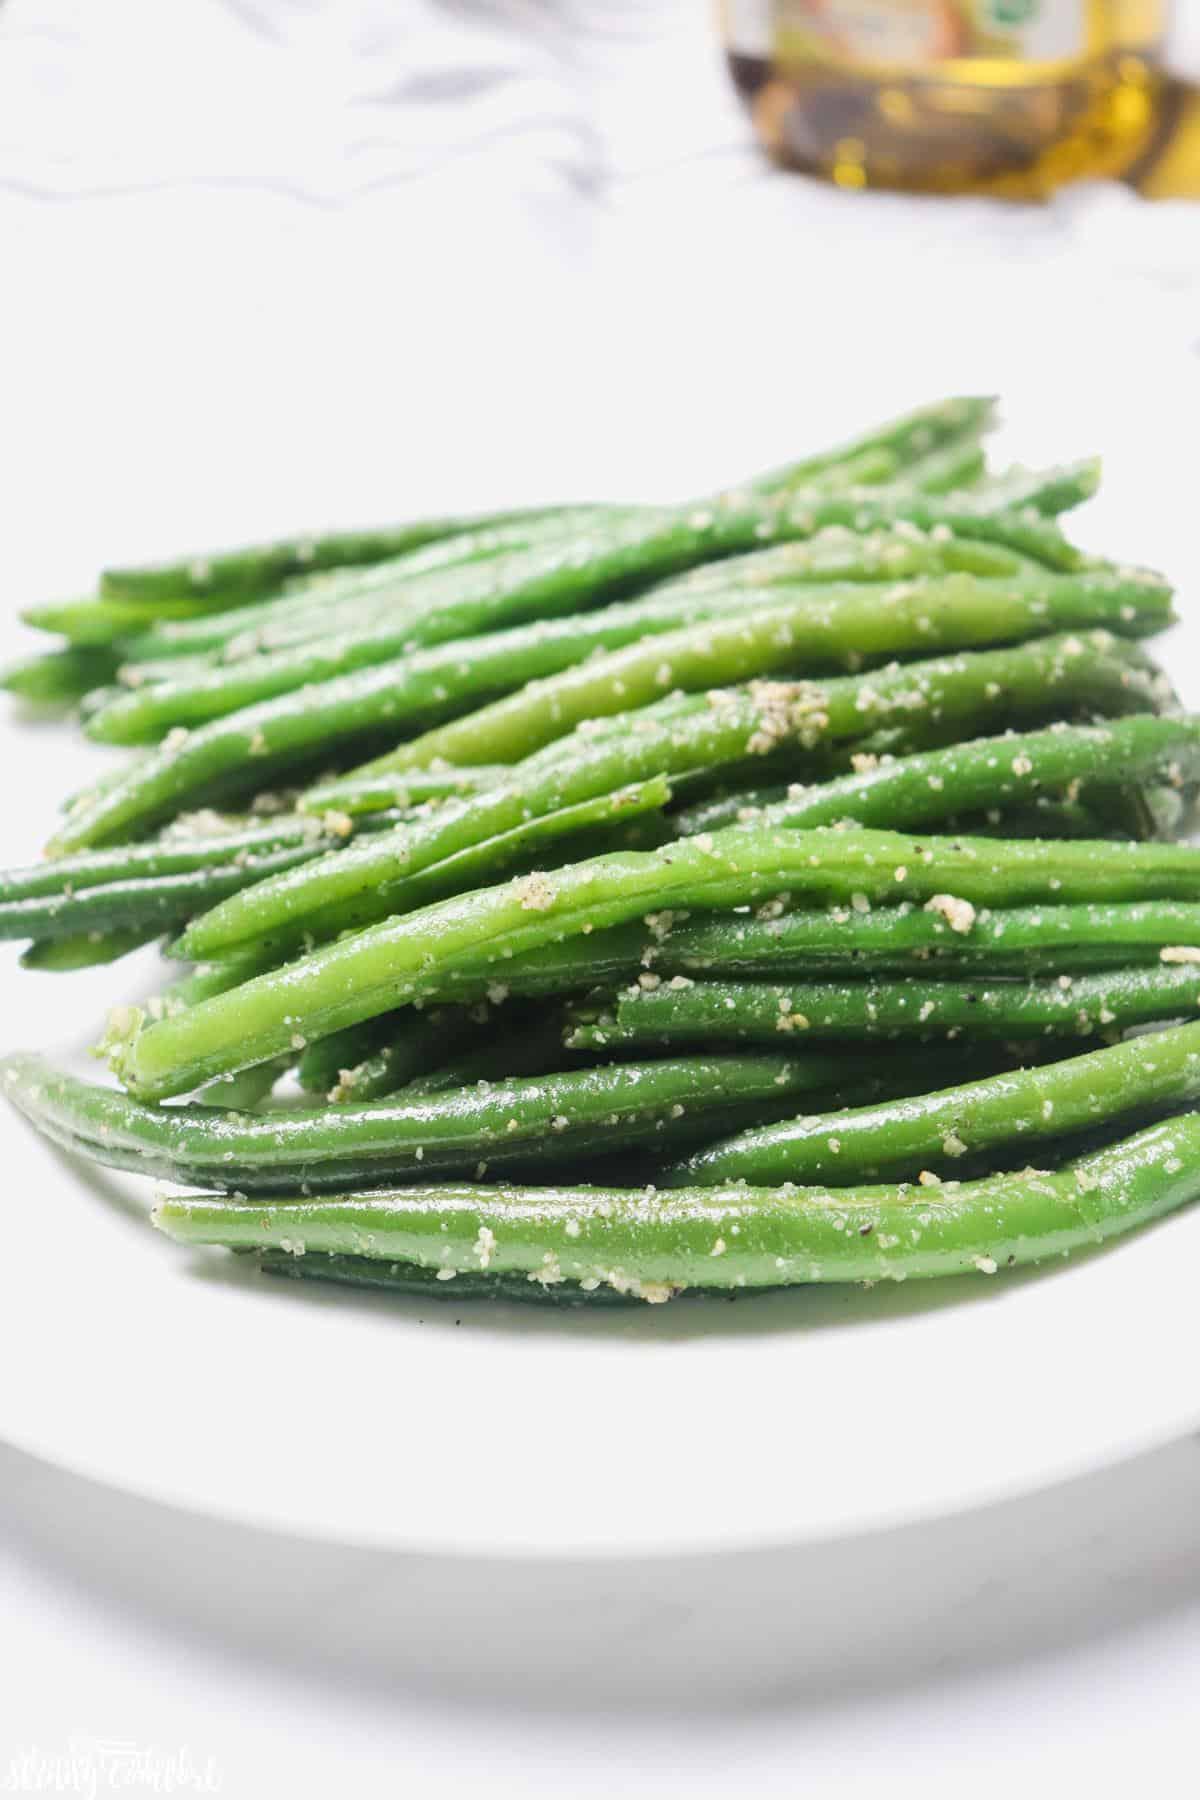 Cooked garlic Parmesan green beans on plate